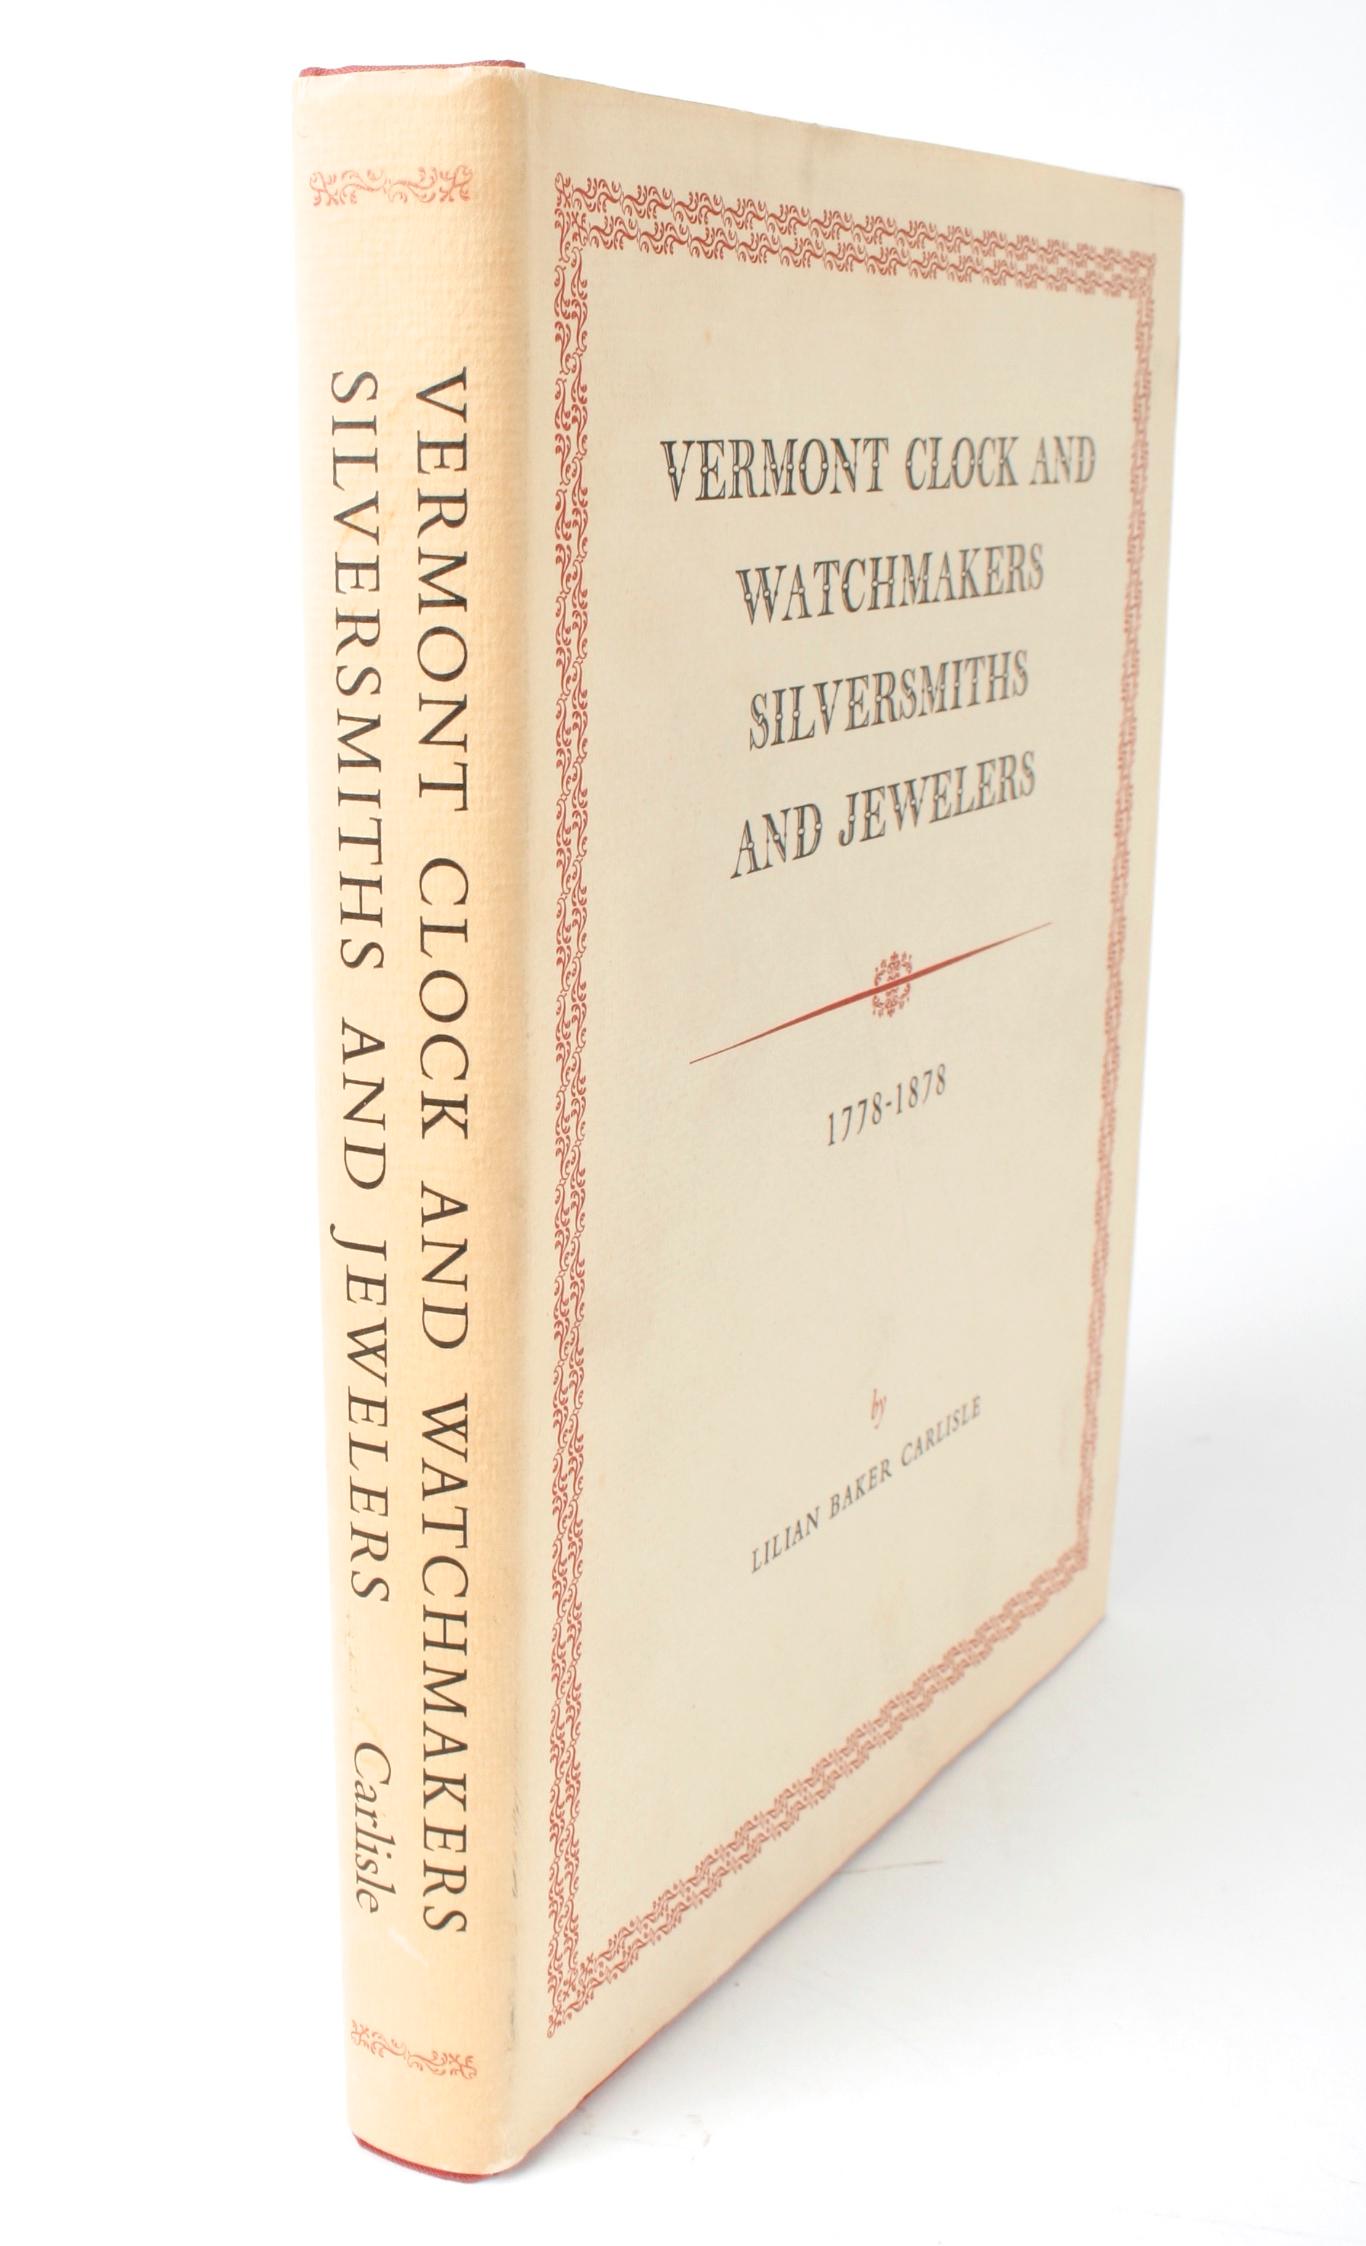 Vermont Clock & Watchmakers, Silversmiths, & Jewelers, 1778-1878, Signed Ltd Ed For Sale 5